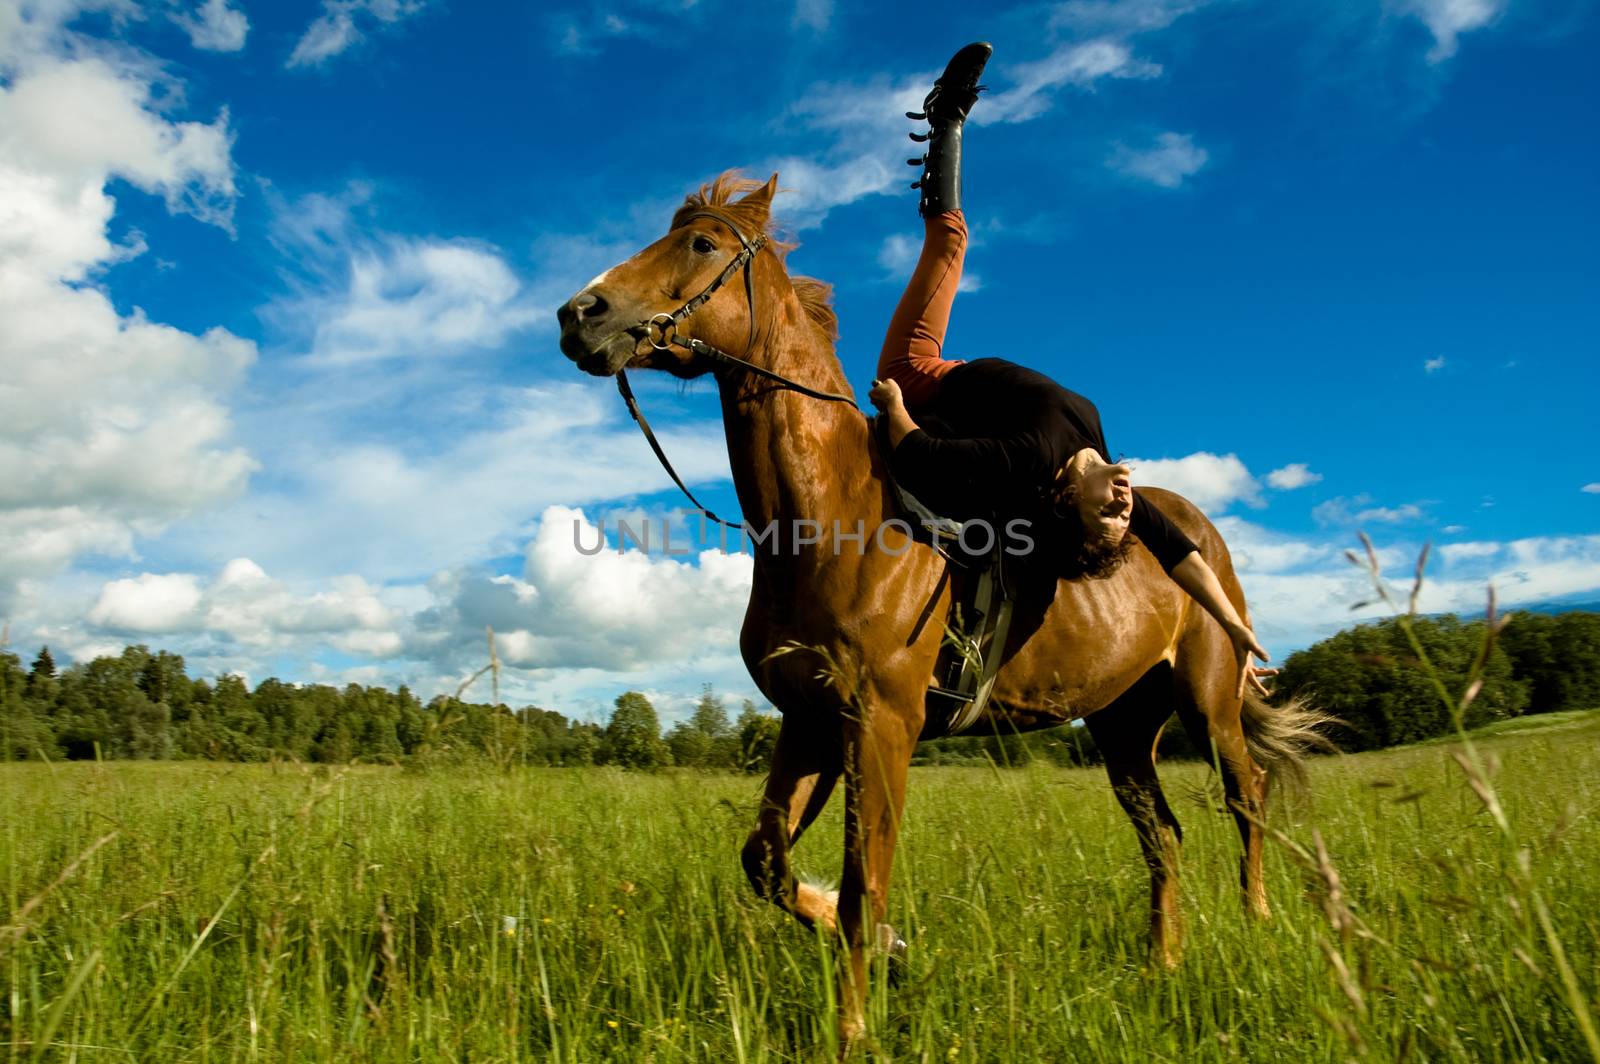 Woman ride on the horse in nature